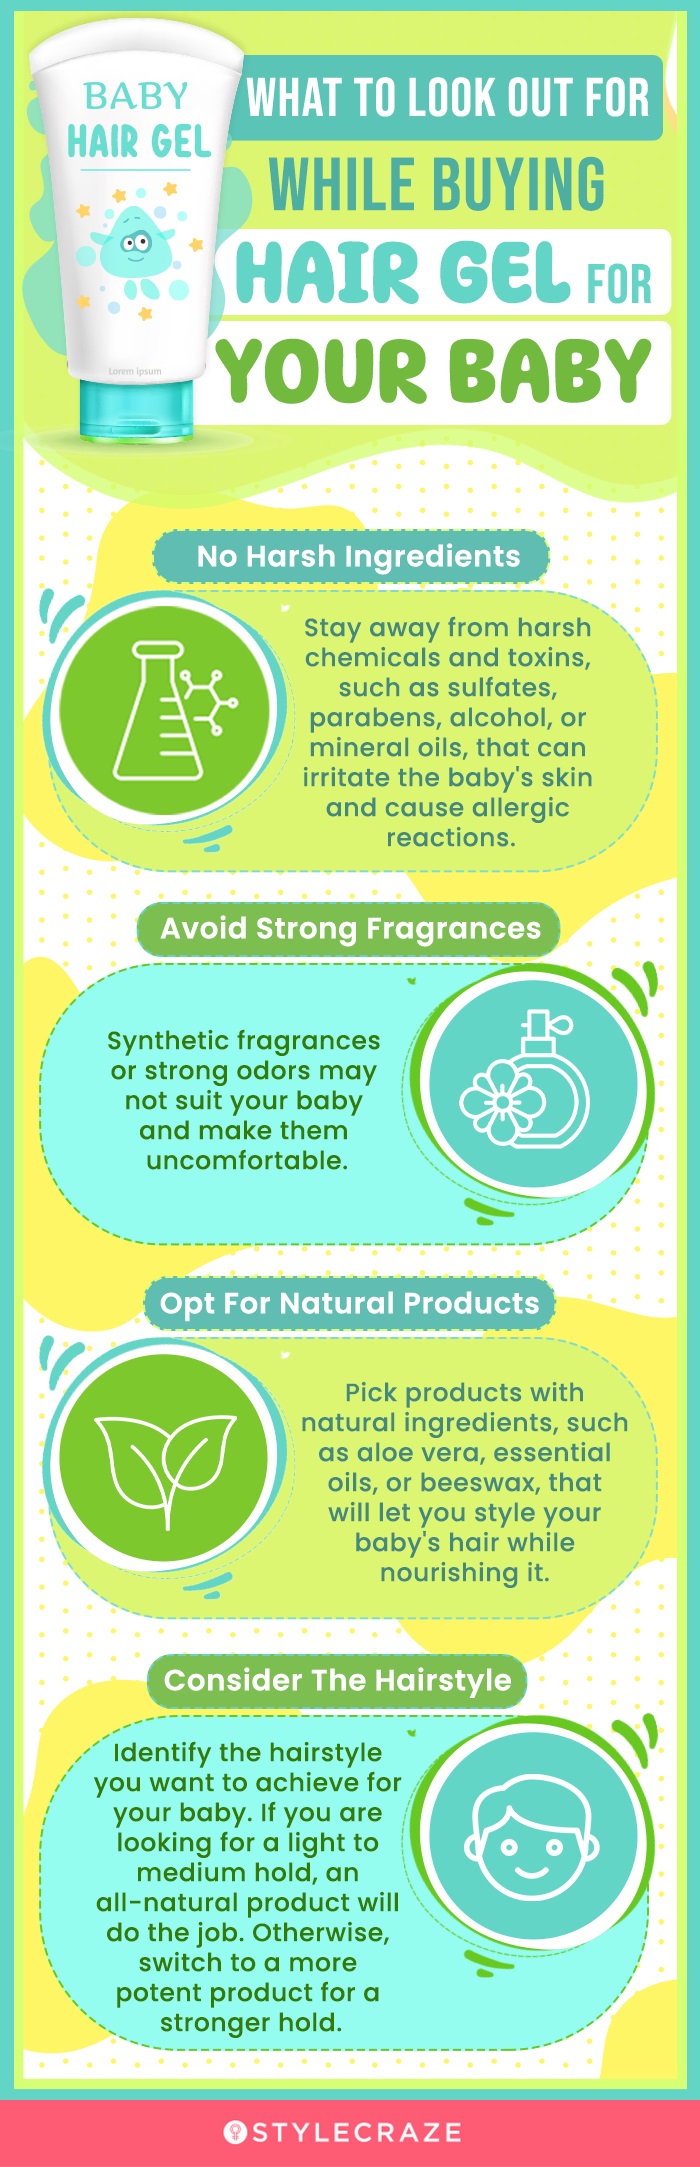 What To Look Out For While Buying Hair Gel For Your Baby (infographic)